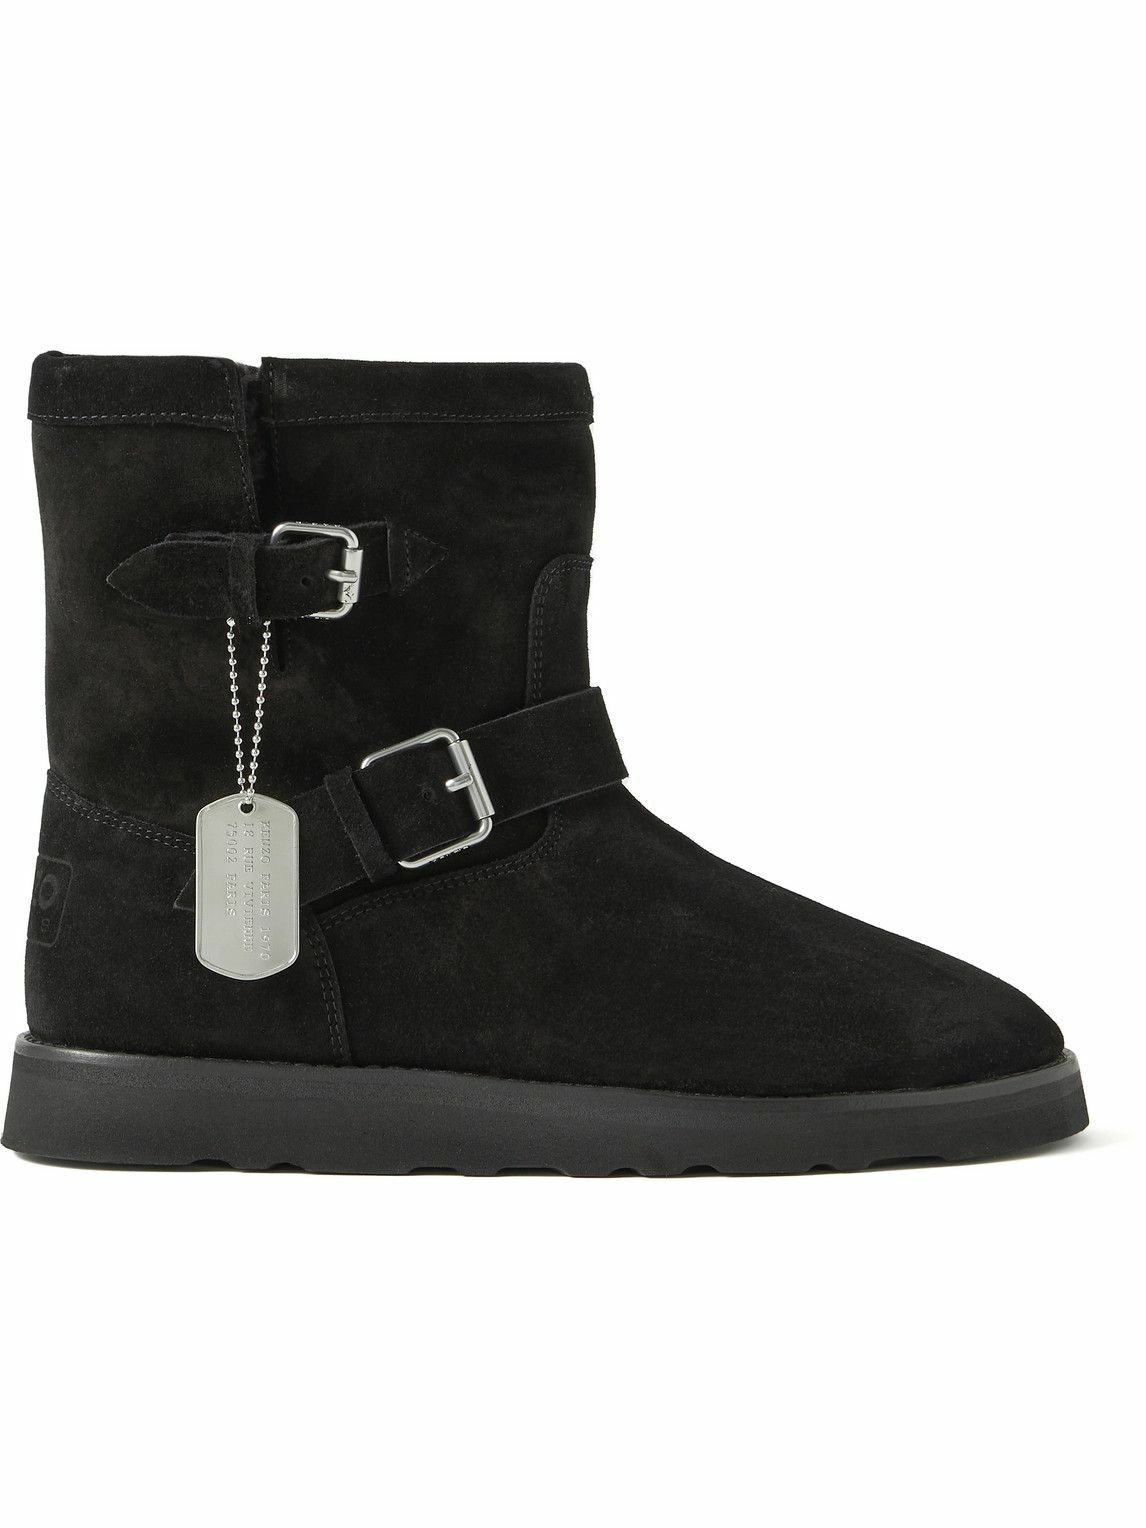 Photo: KENZO - Kenzocozy Shearling-Lined Suede Boots - Black